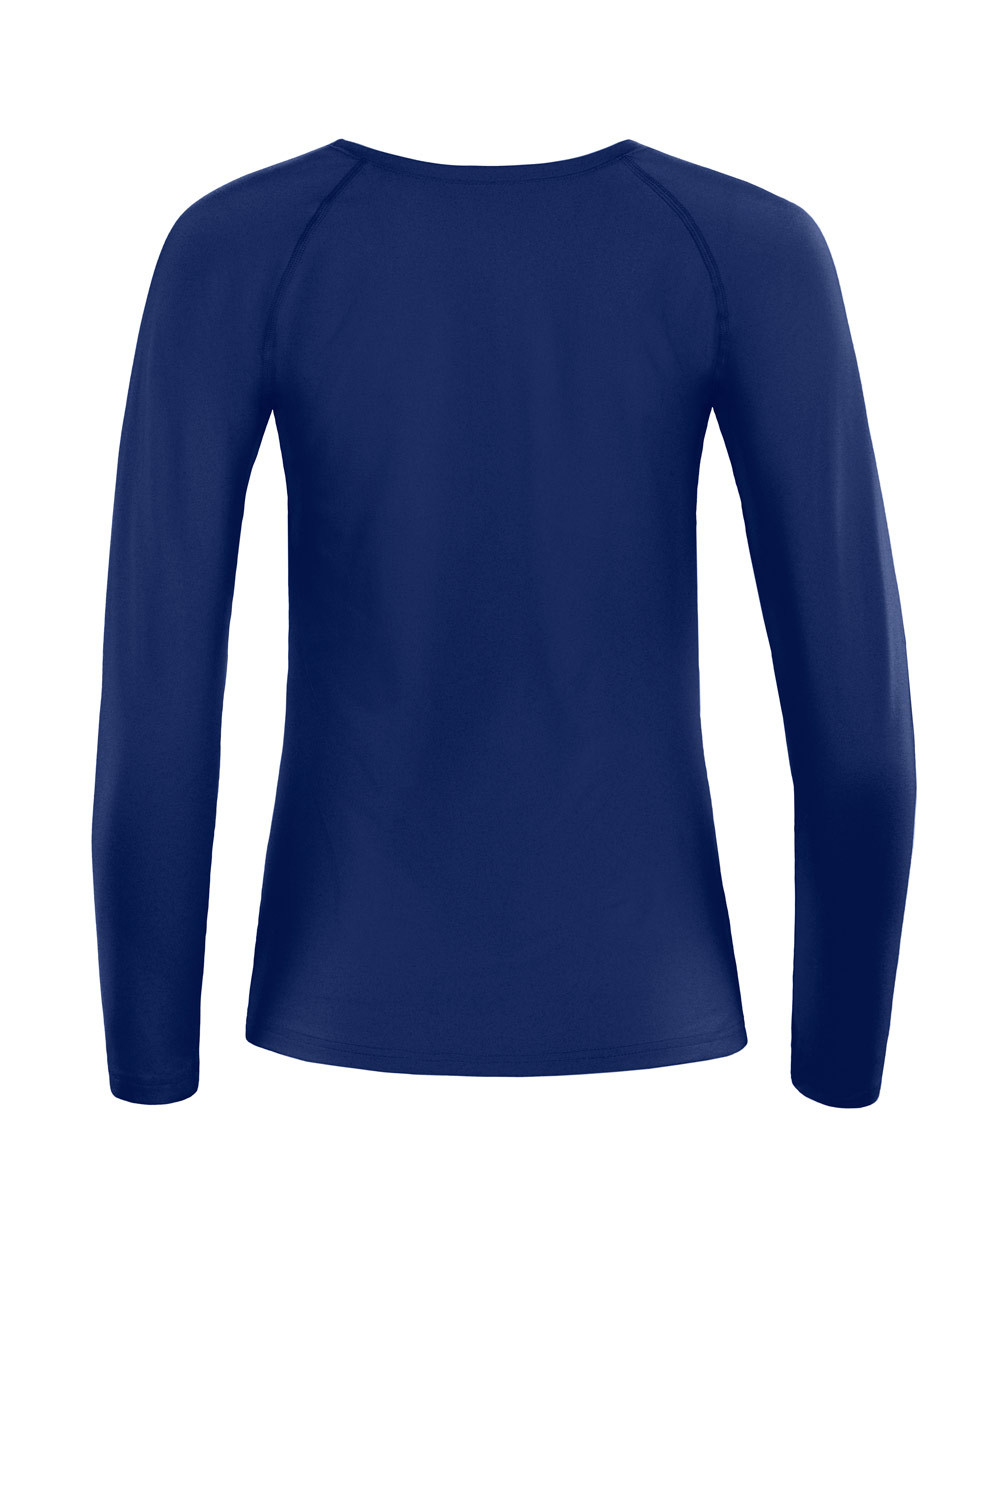 Functional Light and Long Top Style Sleeve dark blue, AET118LS, Ultra Soft Soft Winshape